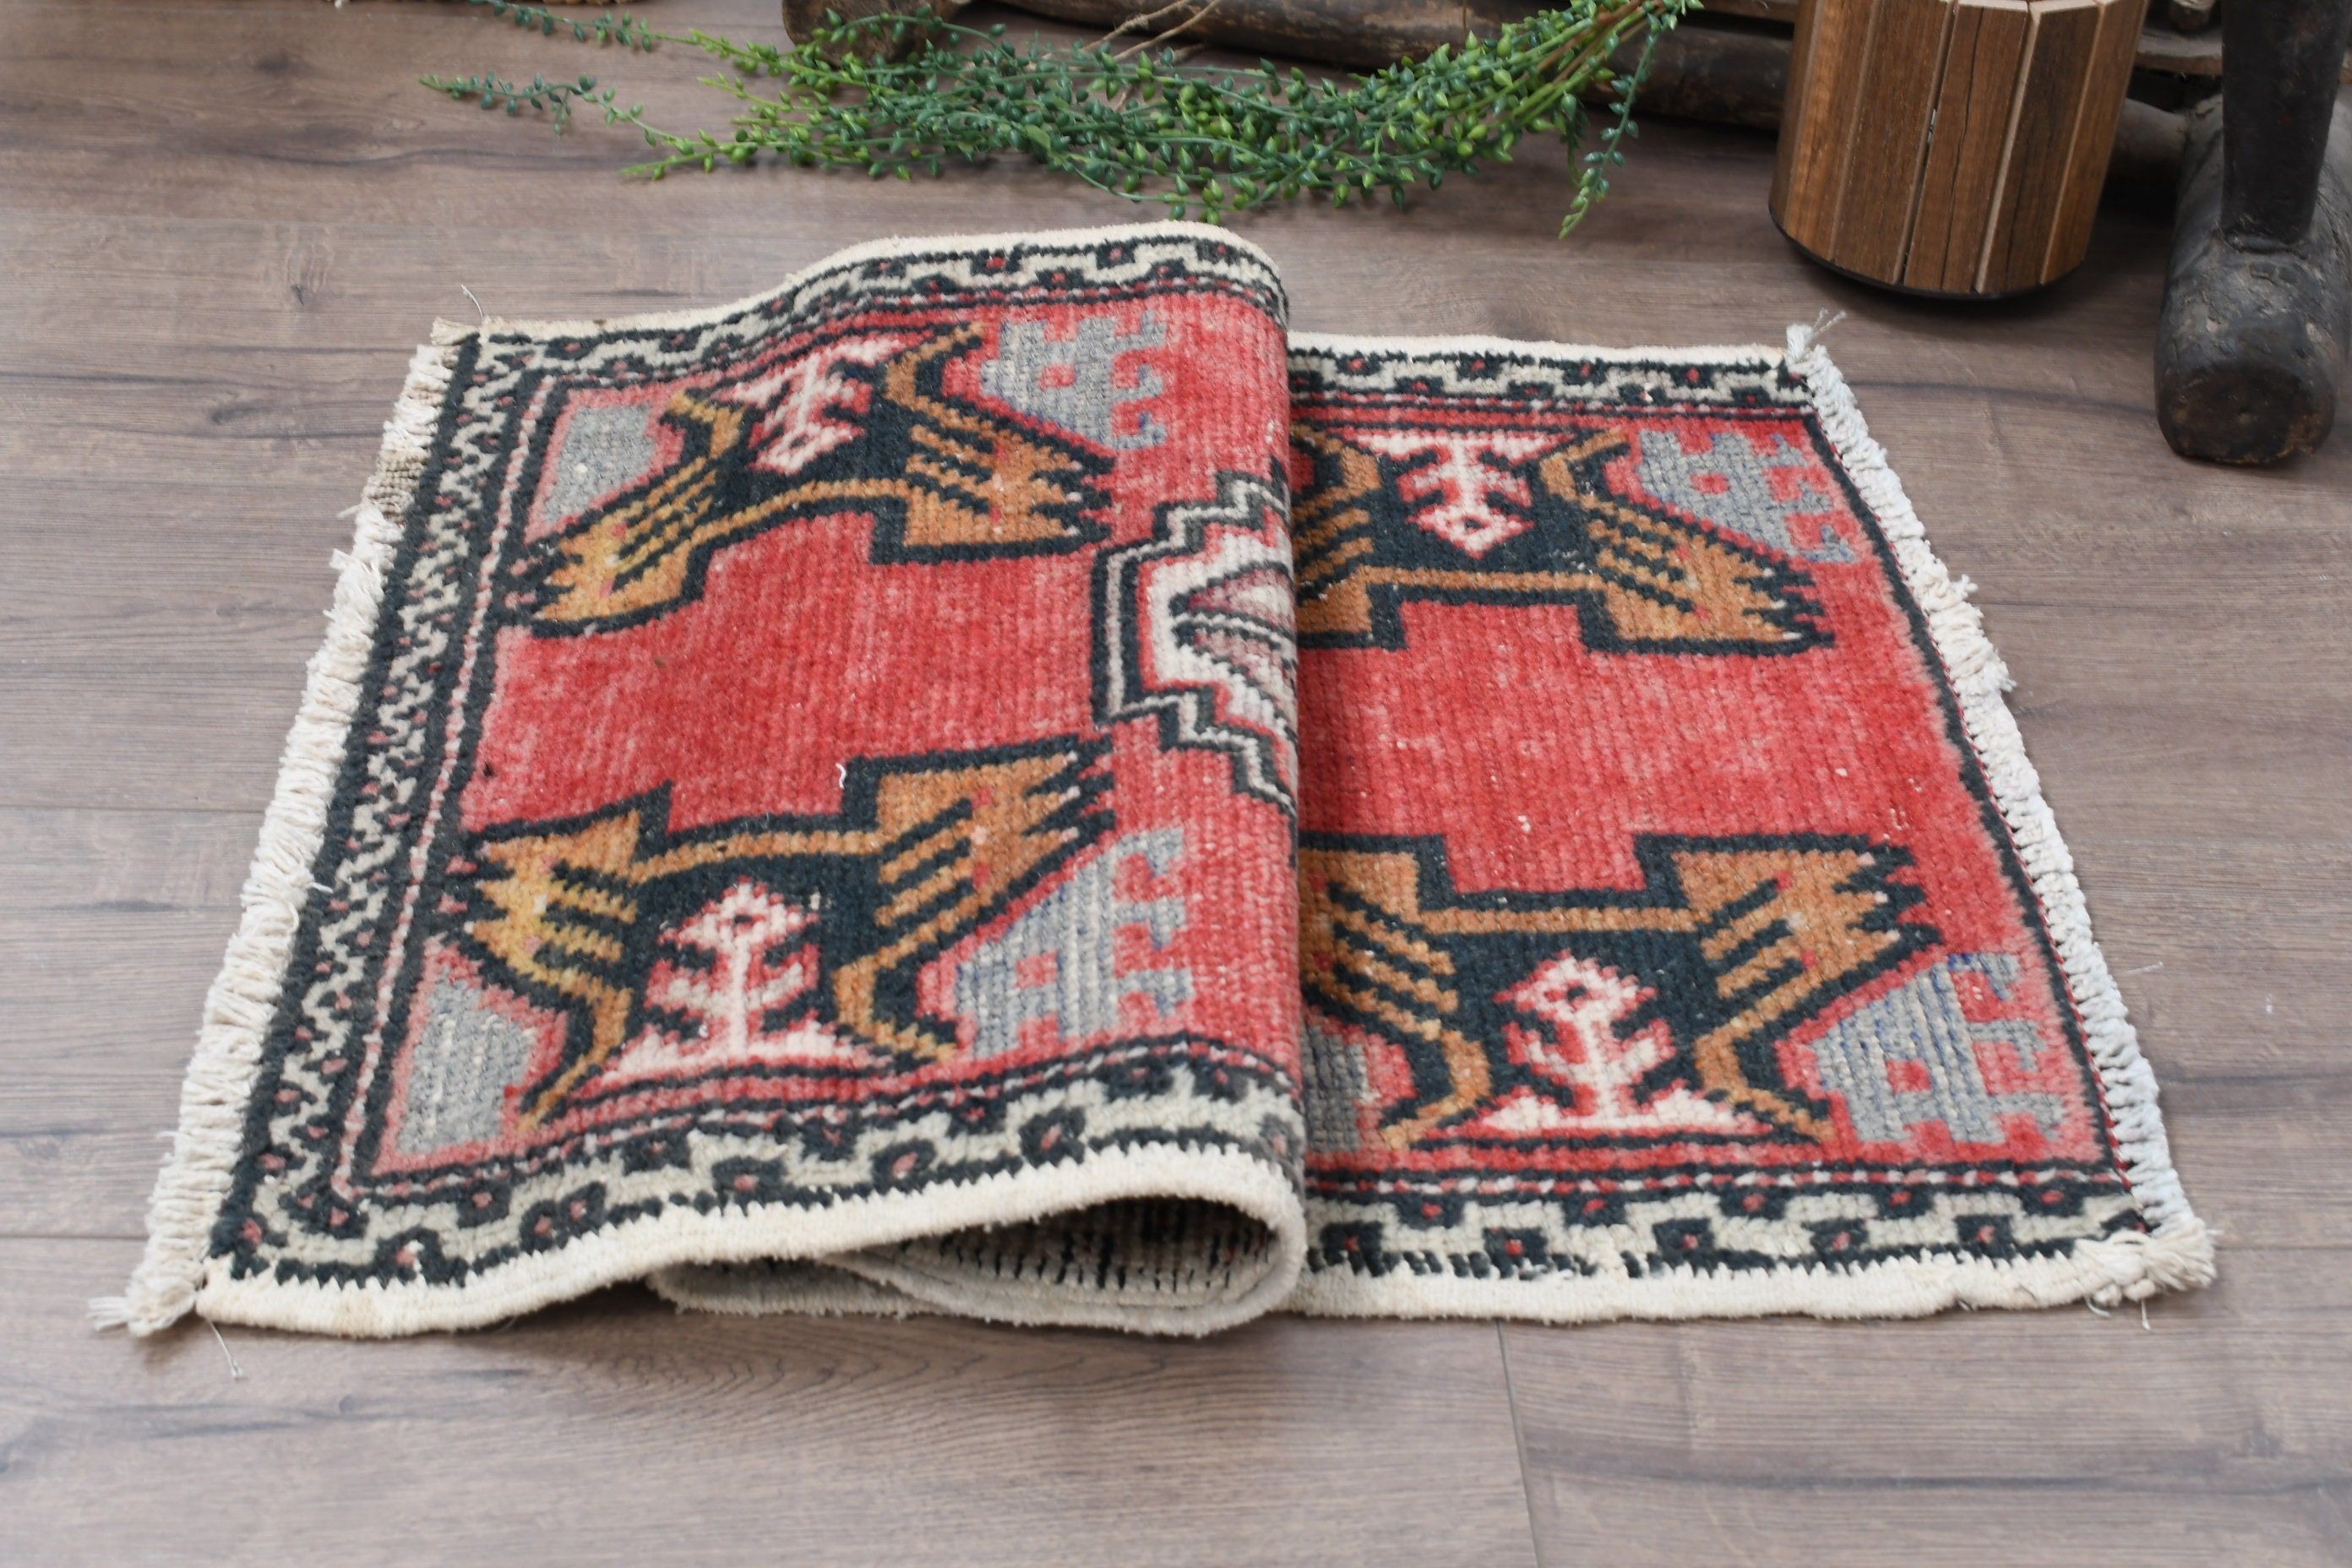 Red Wool Rugs, Vintage Rugs, Turkish Rug, Rugs for Door Mat, 1.7x3 ft Small Rug, Antique Rug, Wall Hanging Rug, Moroccan Rug, Car Mat Rug